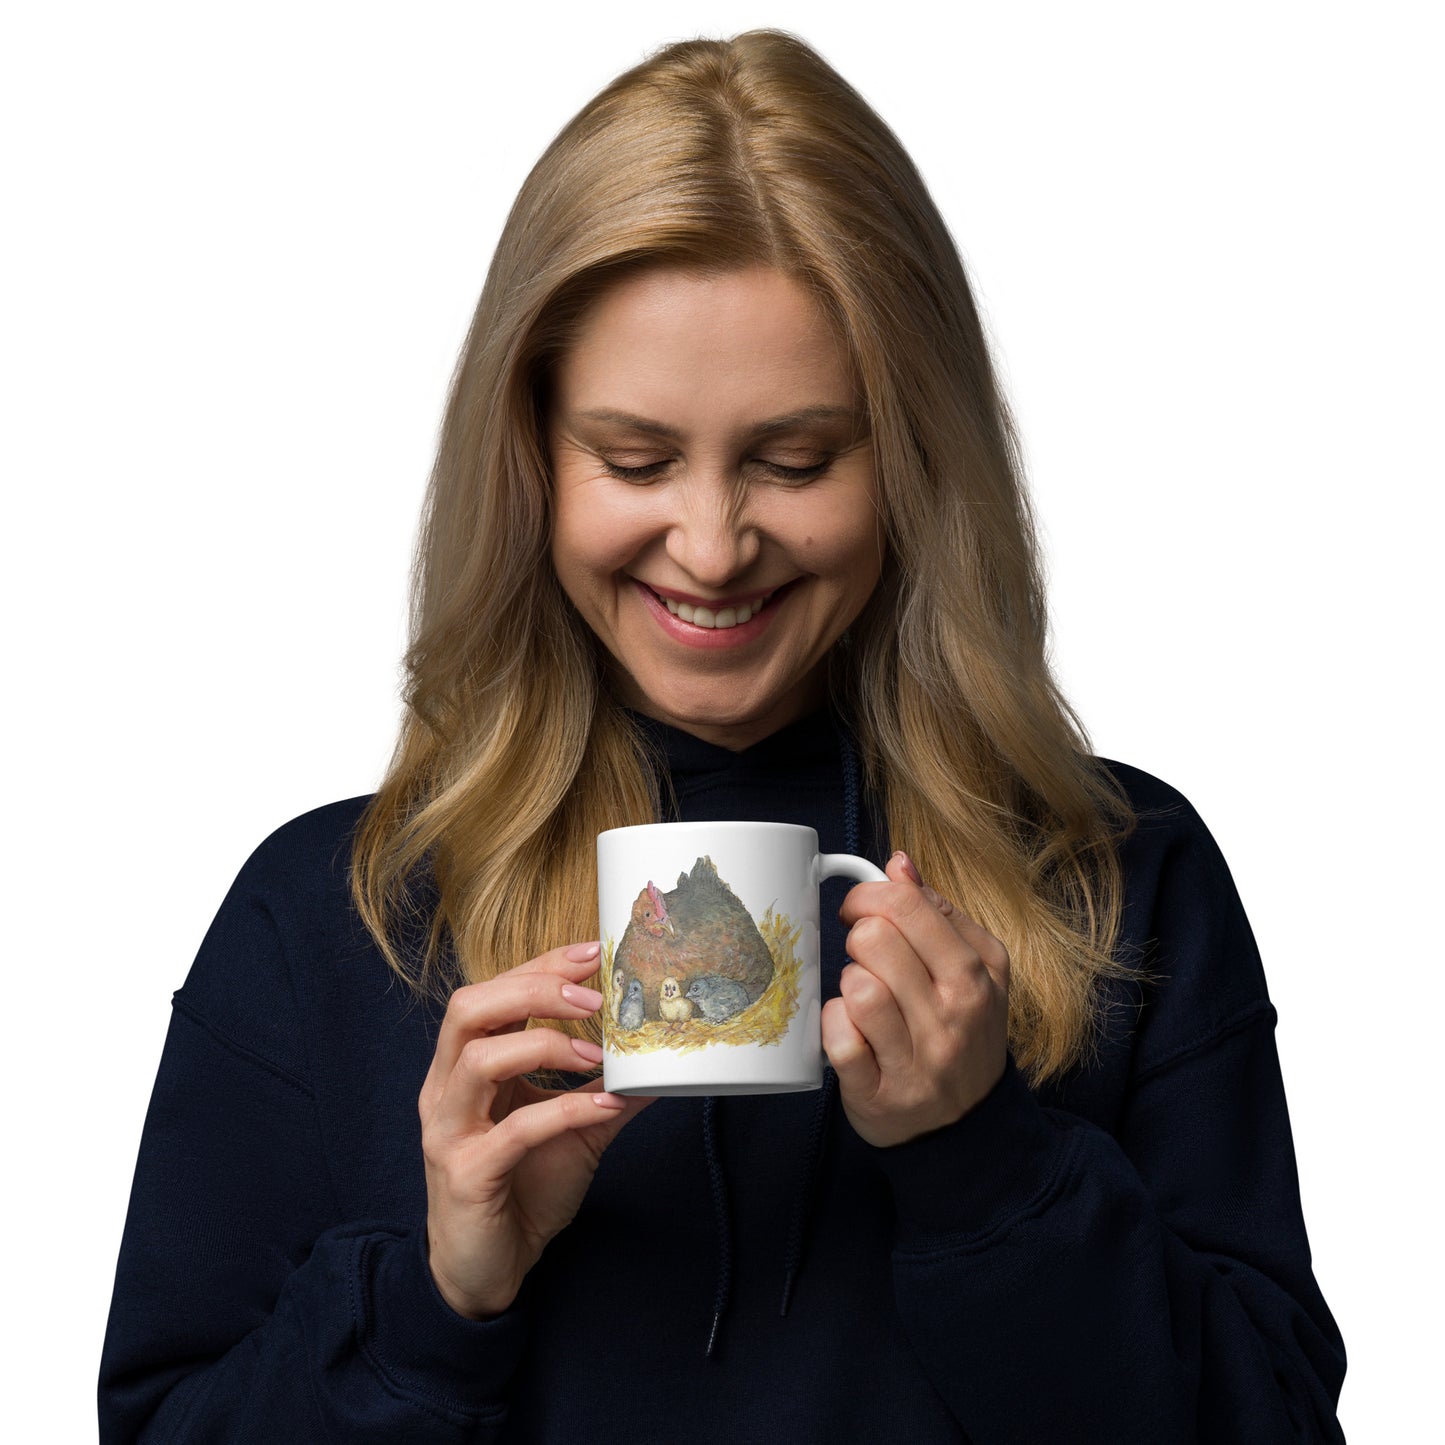 11 ounce white ceramic chicken whisperer mug. Features print of watercolor mother hen and chicks on one side and chicken whisperer text on the other. Dishwasher and microwave safe. Shown in smiling woman's hands.